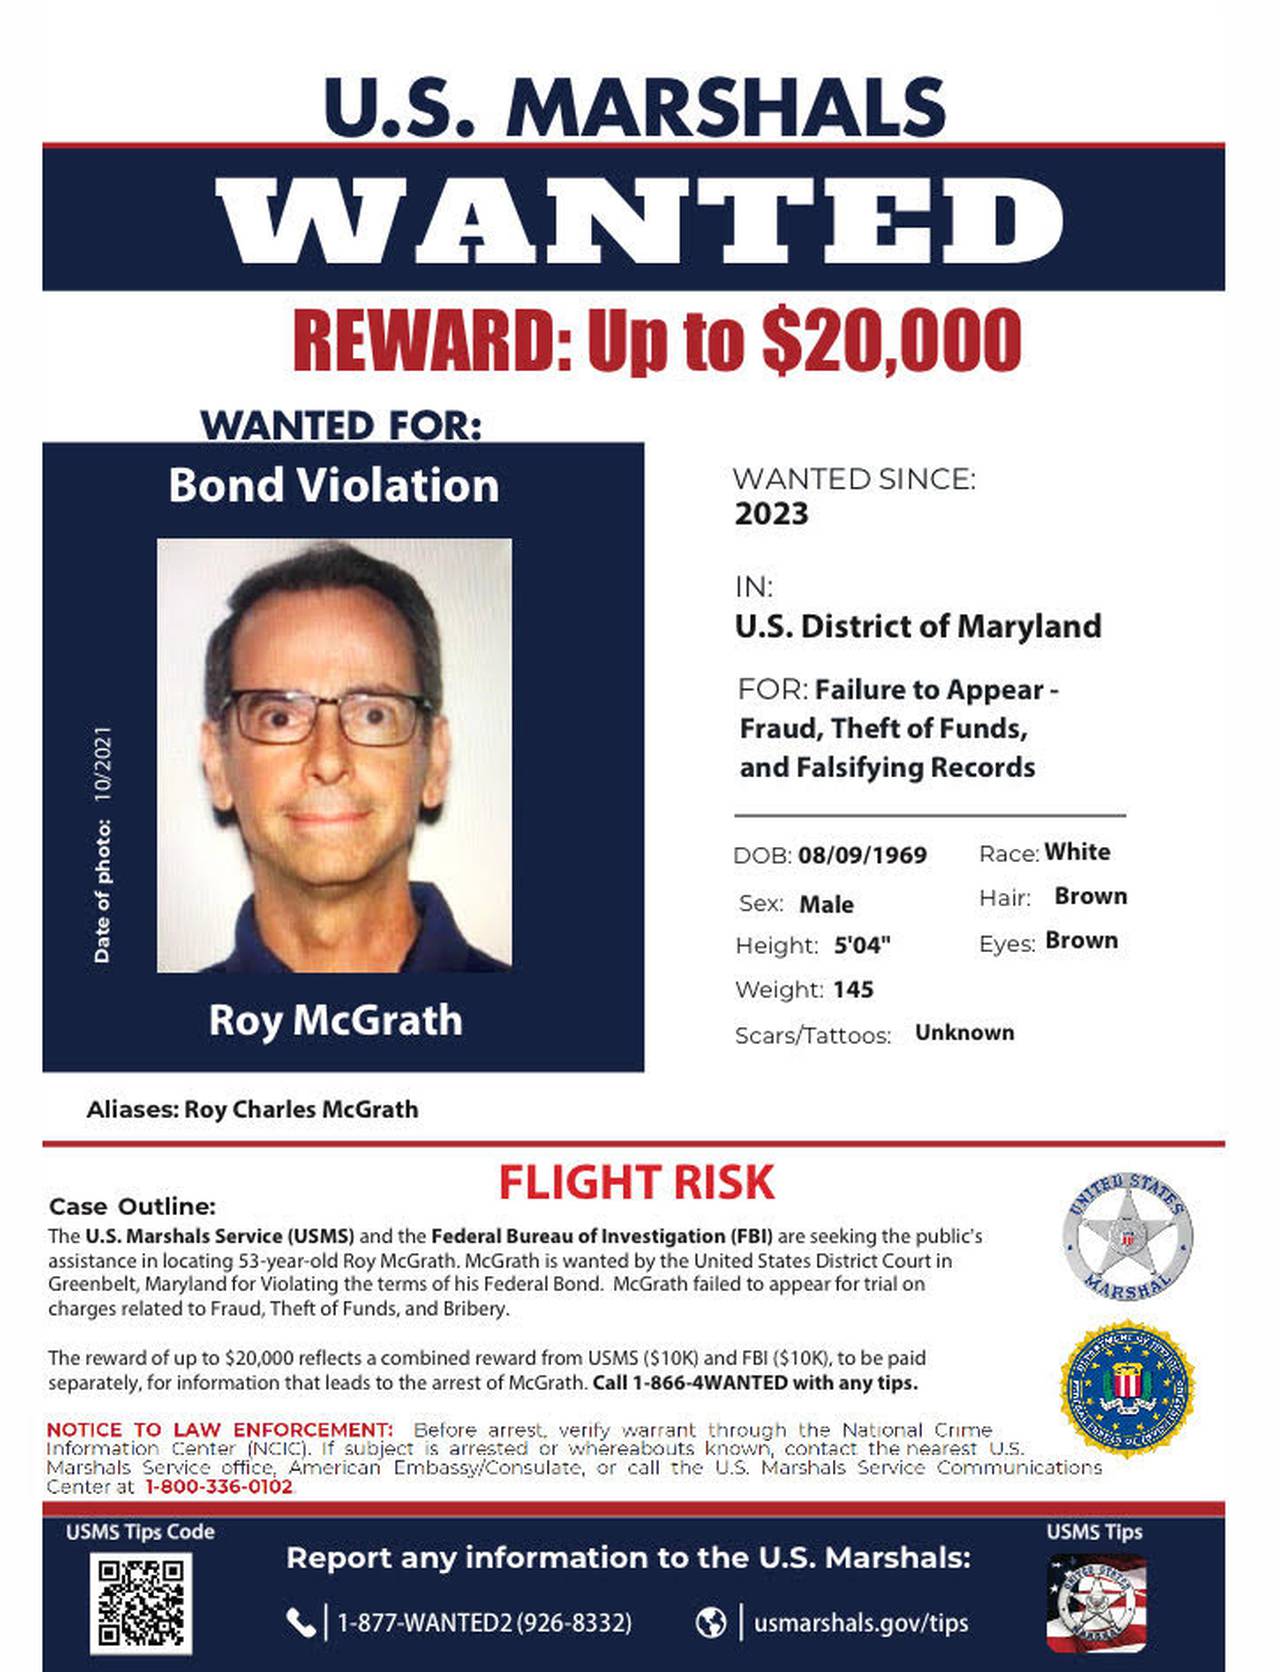 The U.S. Marshals Service and the FBI are teaming up to offer a $20,000 reward for information in the search for Roy McGrath, an ex-top aide to former Gov. Larry Hogan, who didn't show for his federal criminal trial and is considered a fugitive.